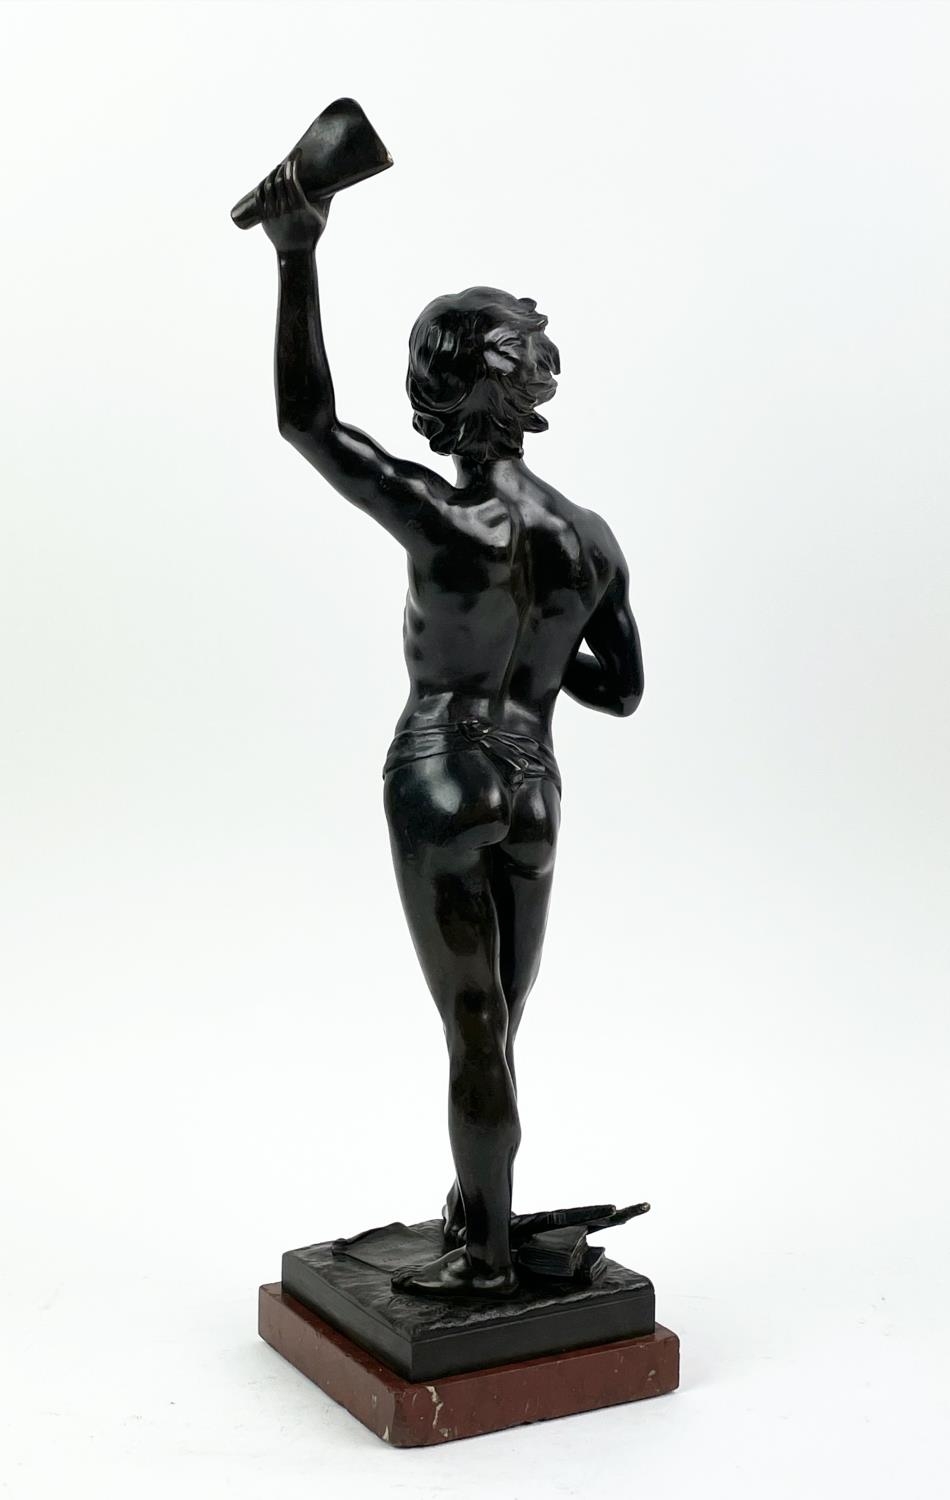 BRONZE FIGURE, ANGLES CANE (1859-1911), 'Premier triumphe', mounted on a rouge marble plinth base, - Image 4 of 8